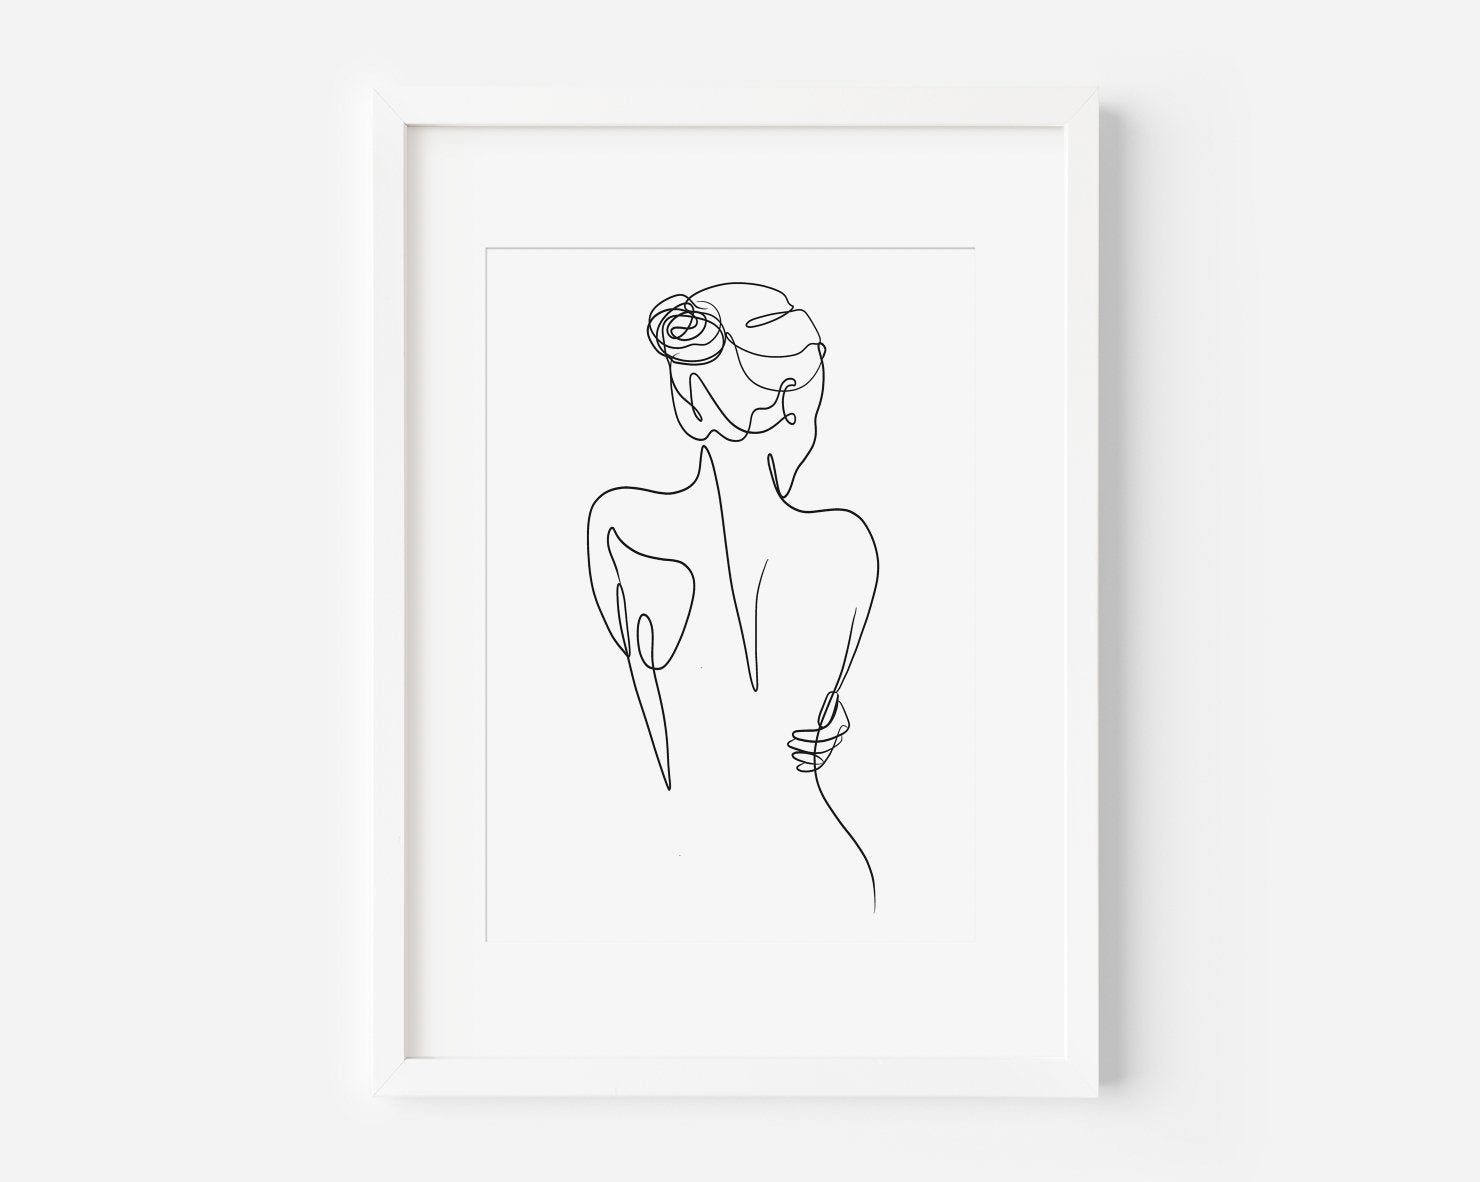 Simply Graceful Line Art Poster Print - Created By Zoe